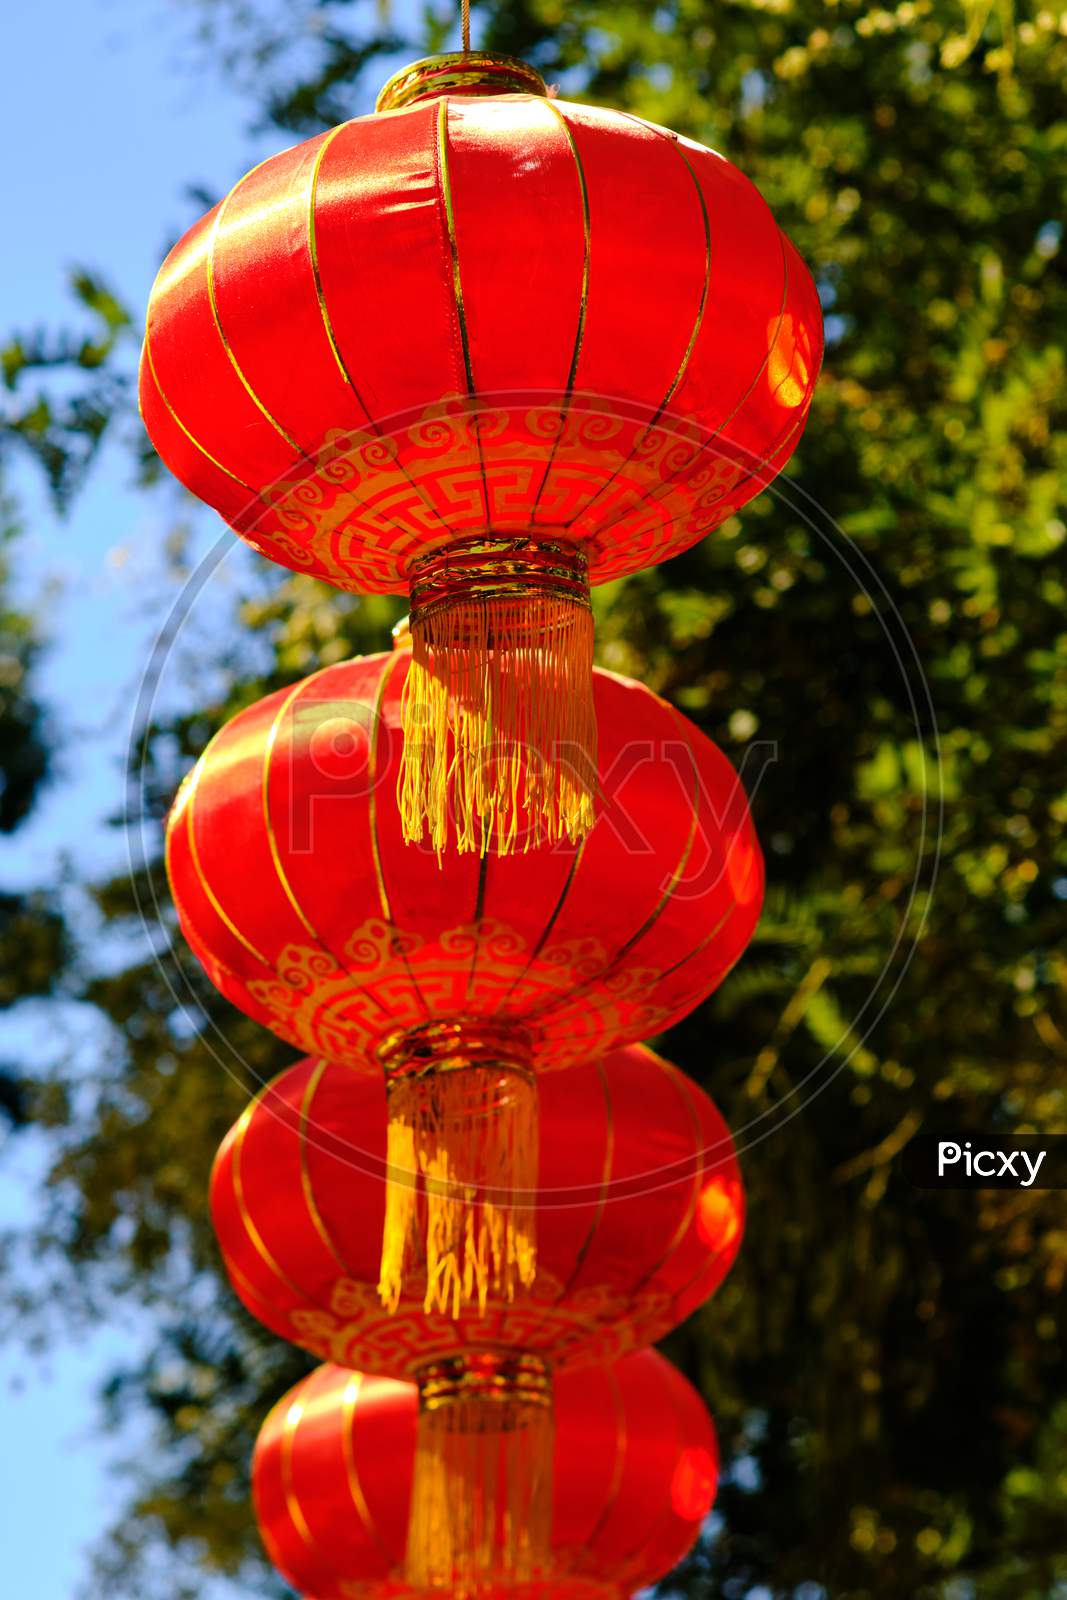 Red Lanterns Hanging In Celebration Of The National Day Of China In Beijing, China